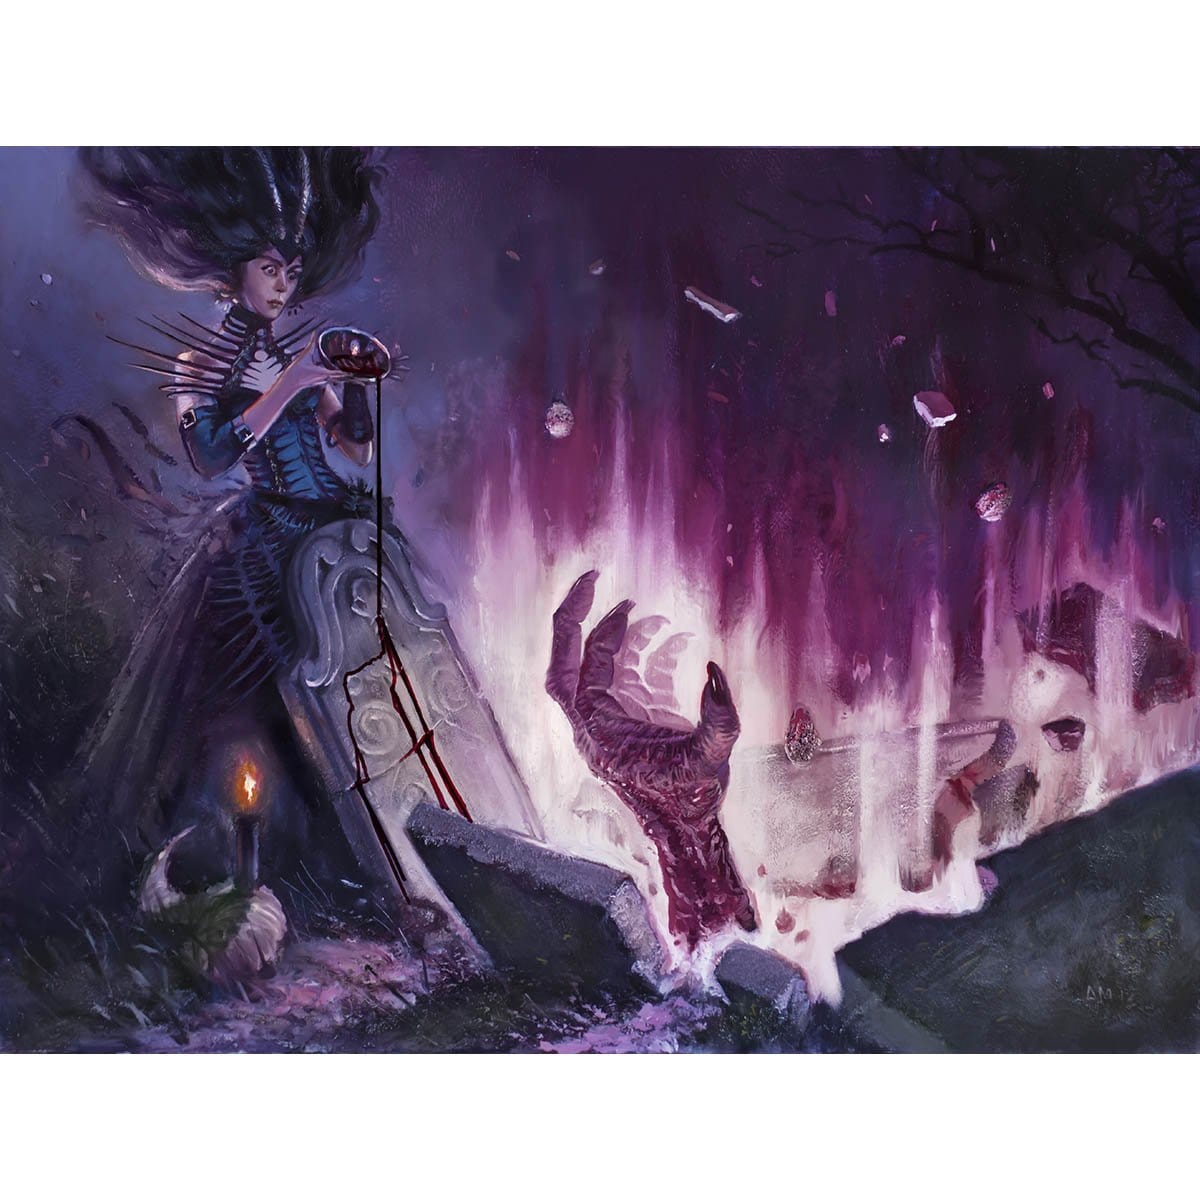 Unmake the Graves Print - Print - Original Magic Art - Accessories for Magic the Gathering and other card games